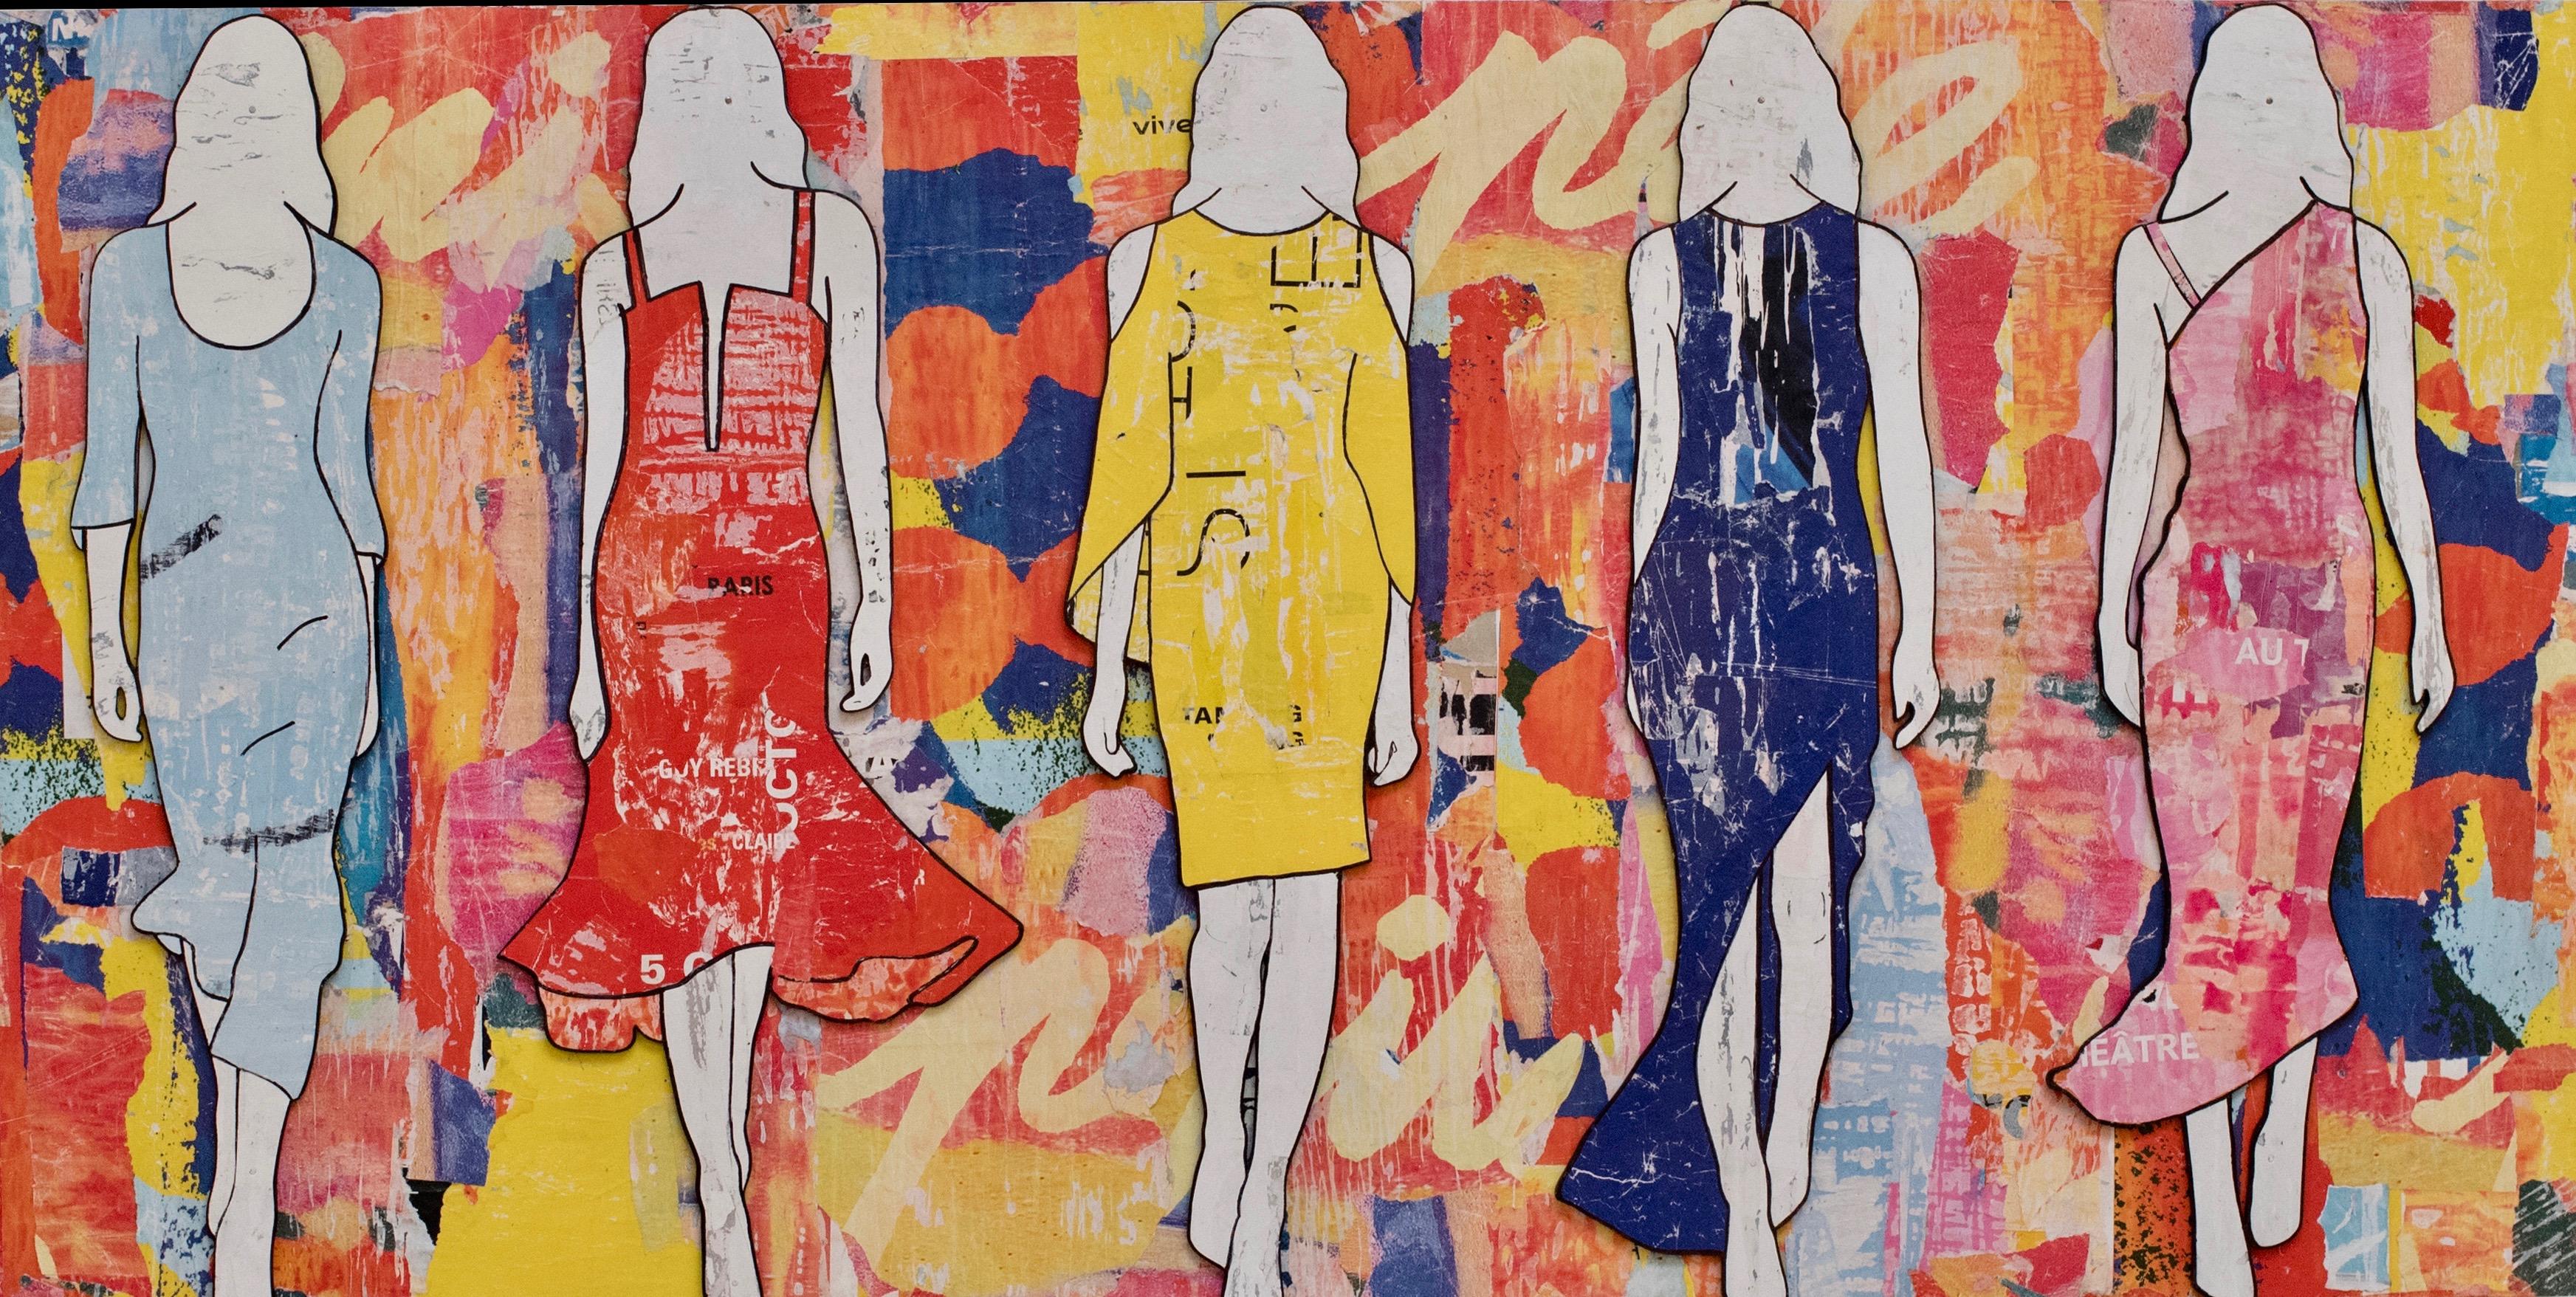 JANE MAXWELL
5 Walking Girls Confetti
Mixed Media with Resin on Panel
30 inches x 60 inches

Jane Maxwell's current work largely focuses on women, body image and the feminine ideal. Her collages are deeply layered works, combining color, texture and